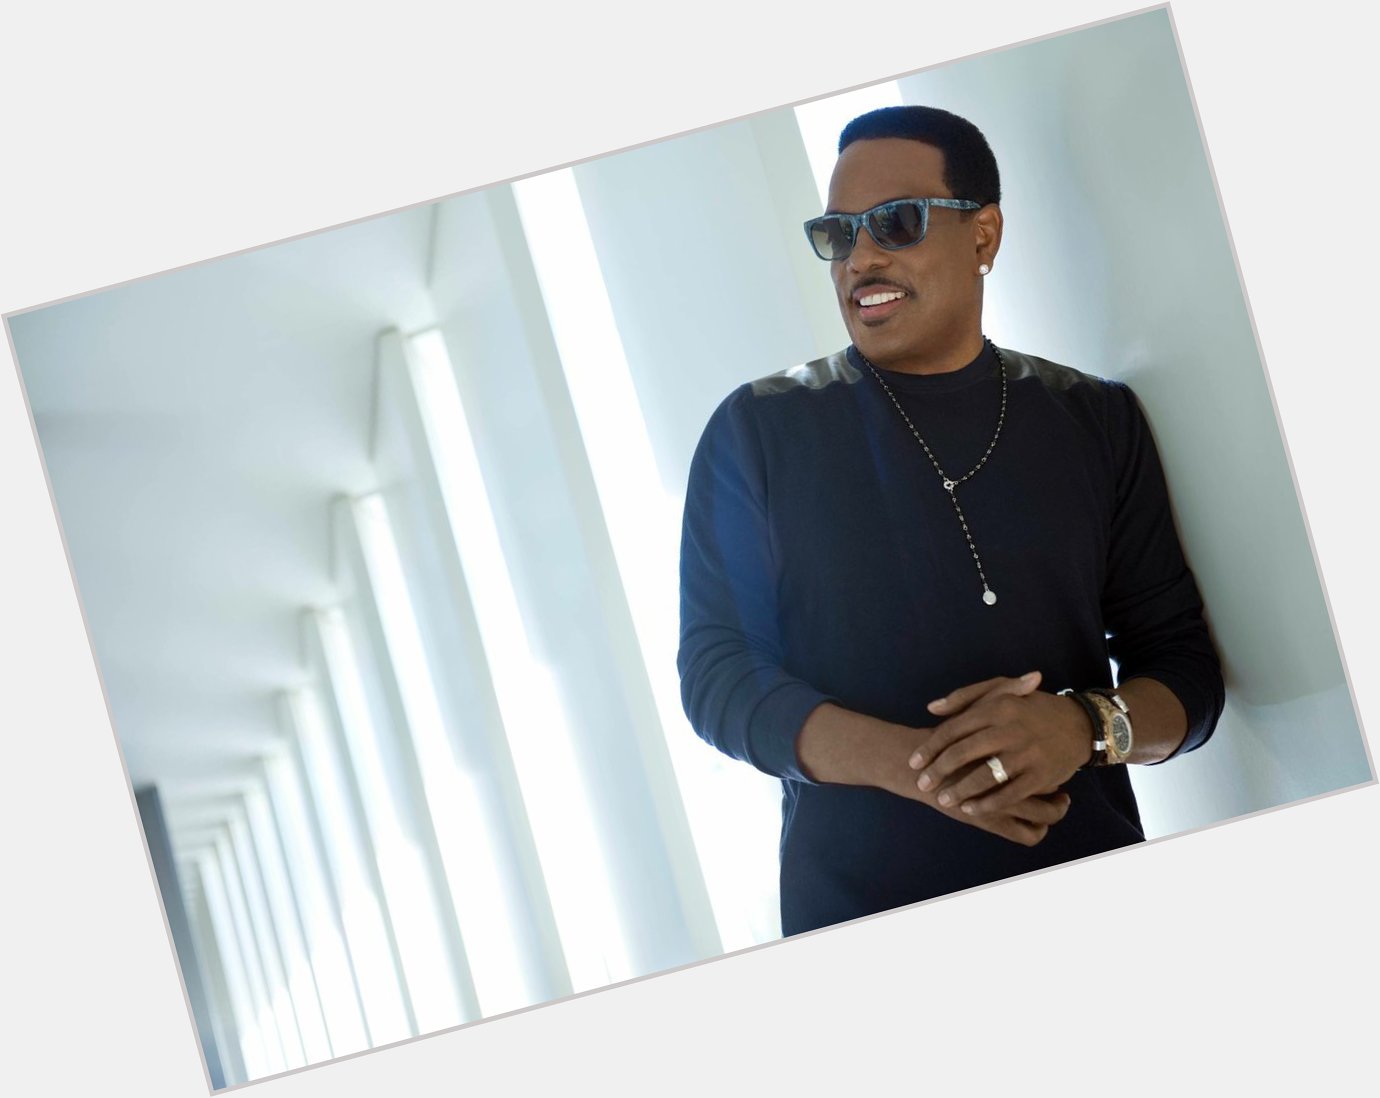 Join us in wishing singer and keyboardist Charlie Wilson a very Happy Birthday. He turns 64 years young today. 